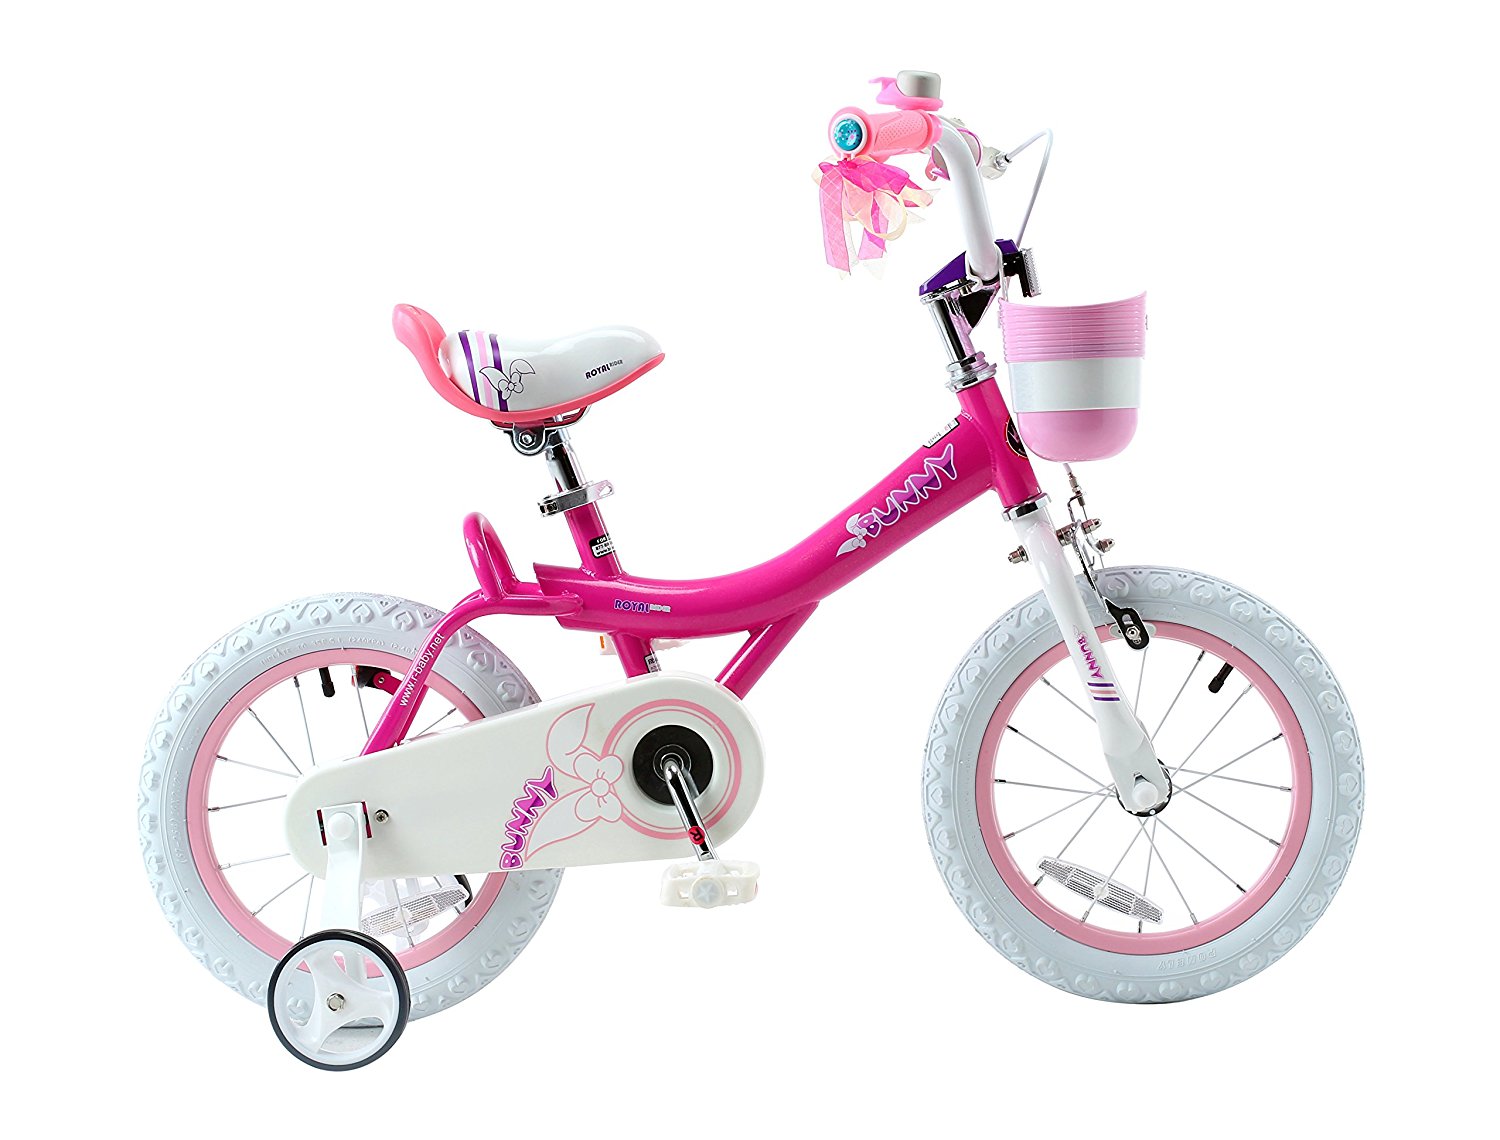 Review of RoyalBaby Jenny & Bunny Girl's Bike with basket